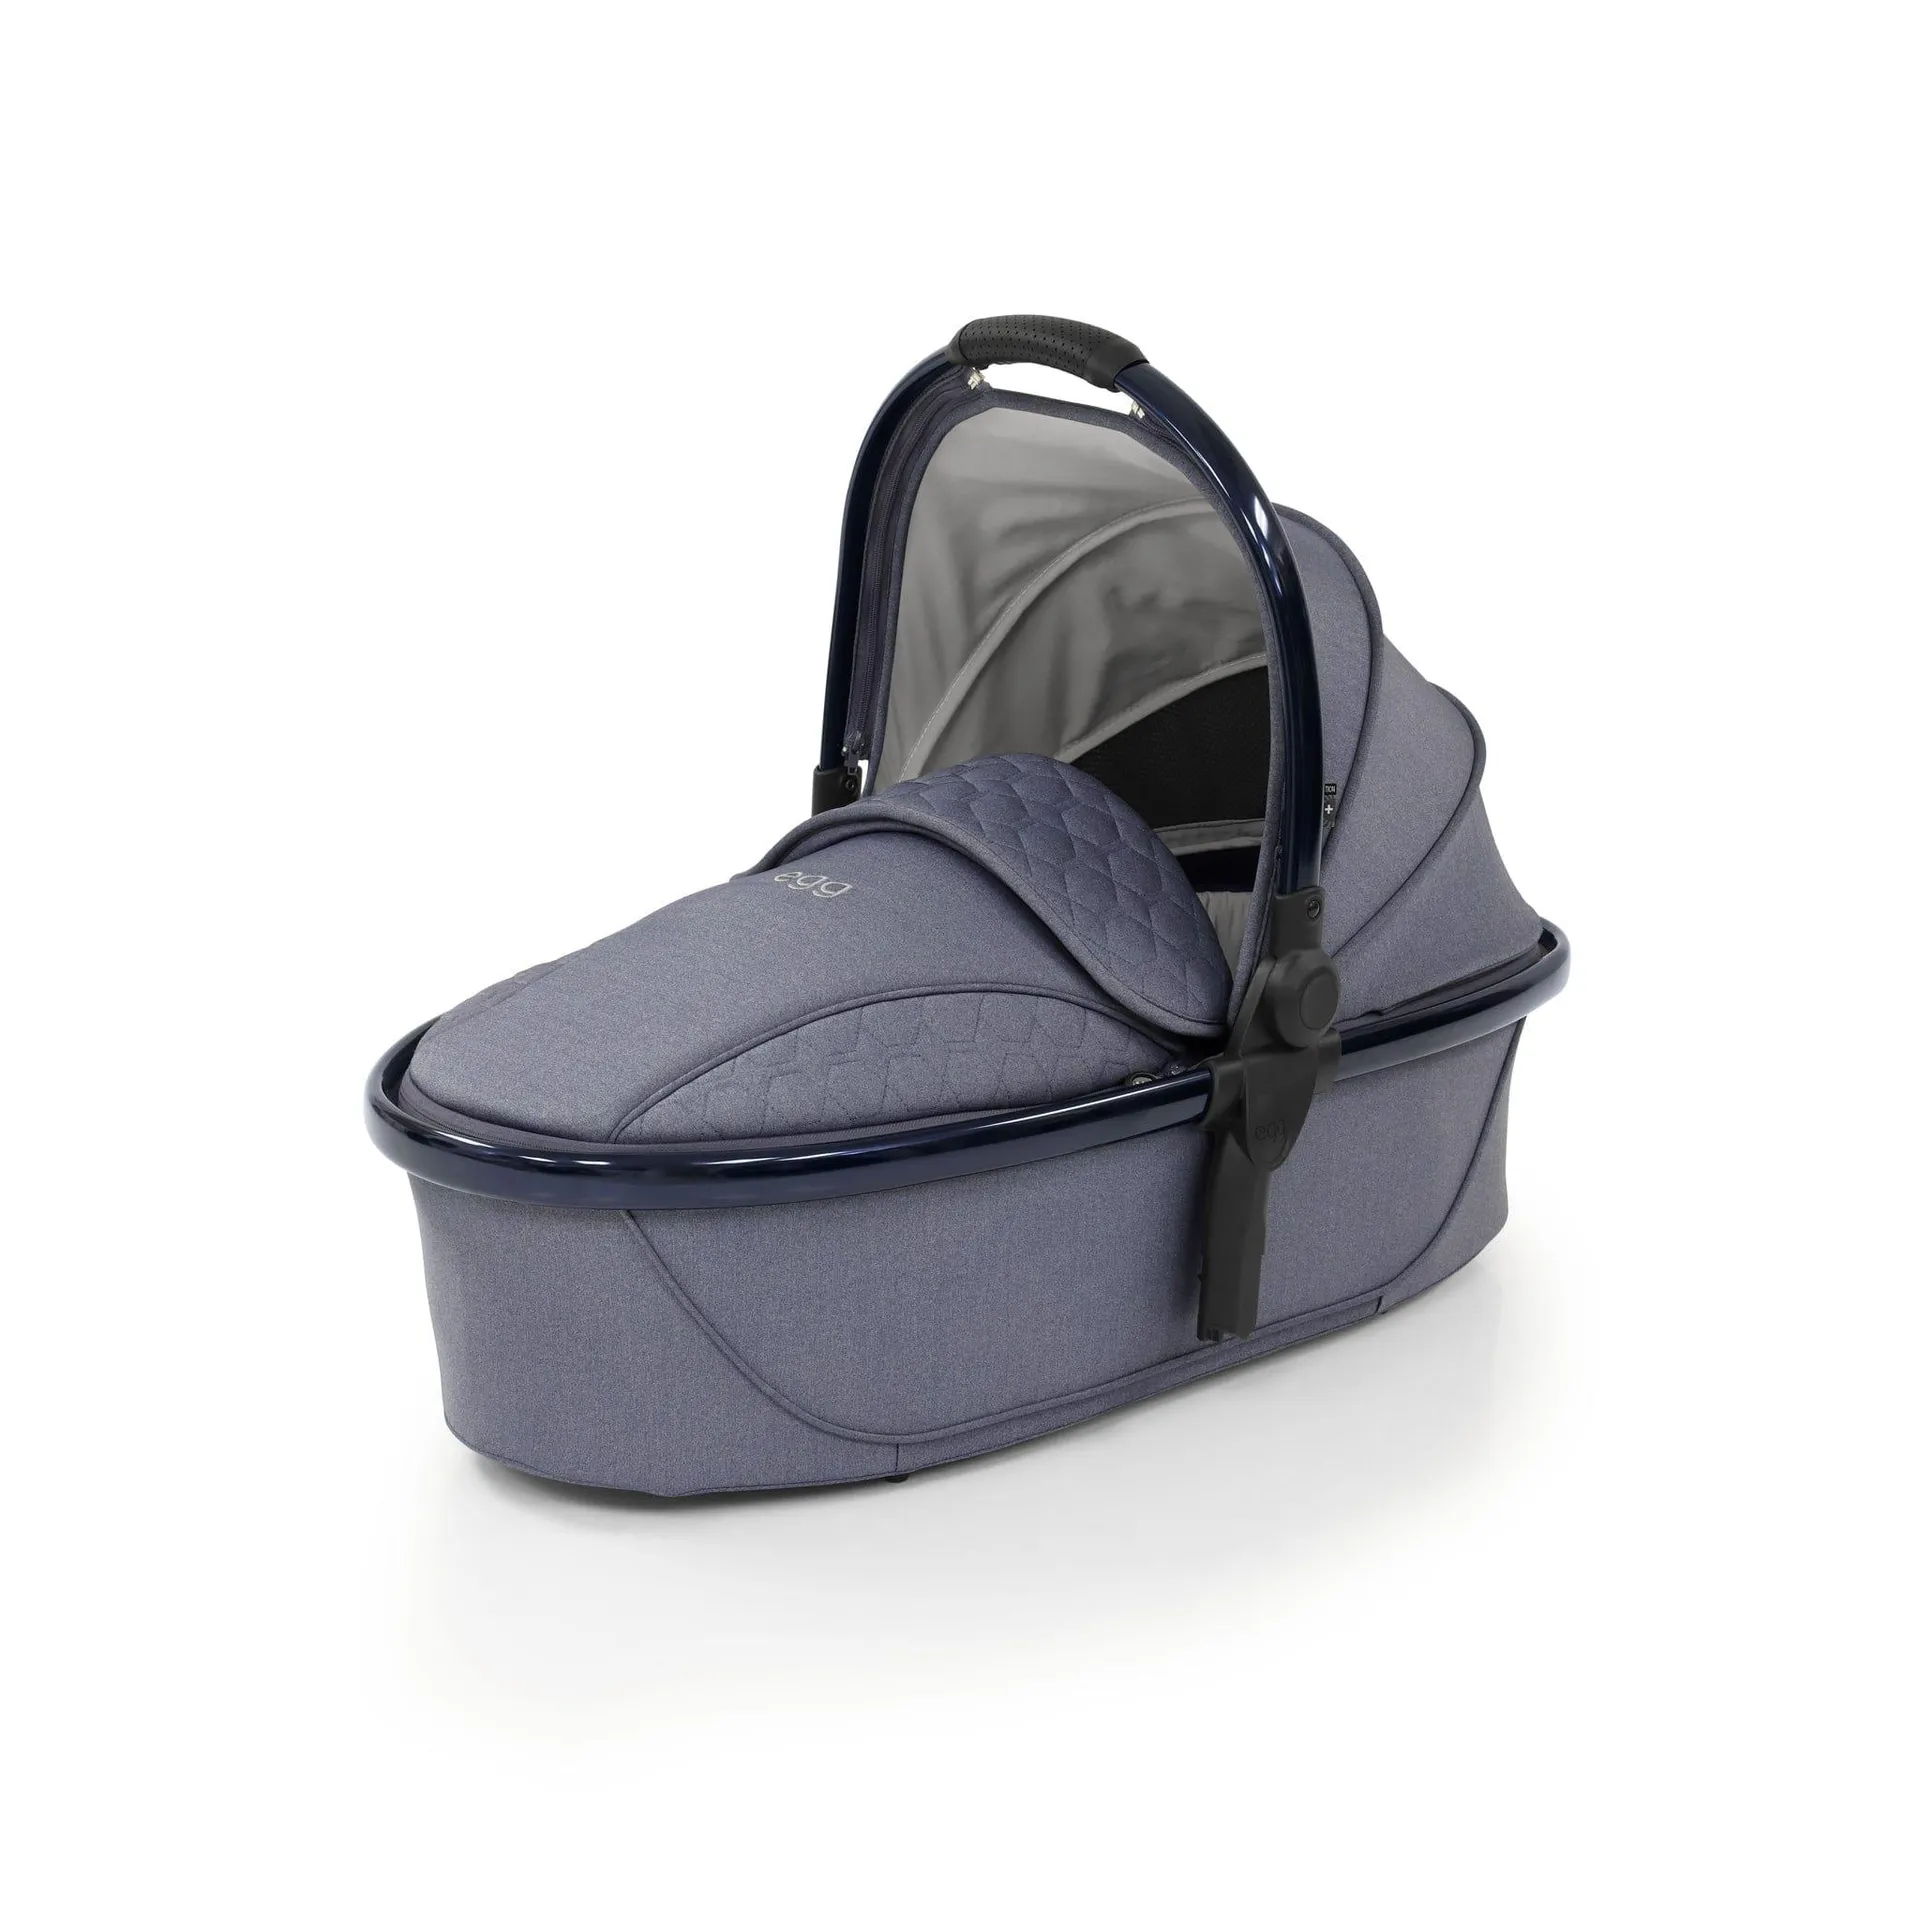 egg2 Carrycot Chambray